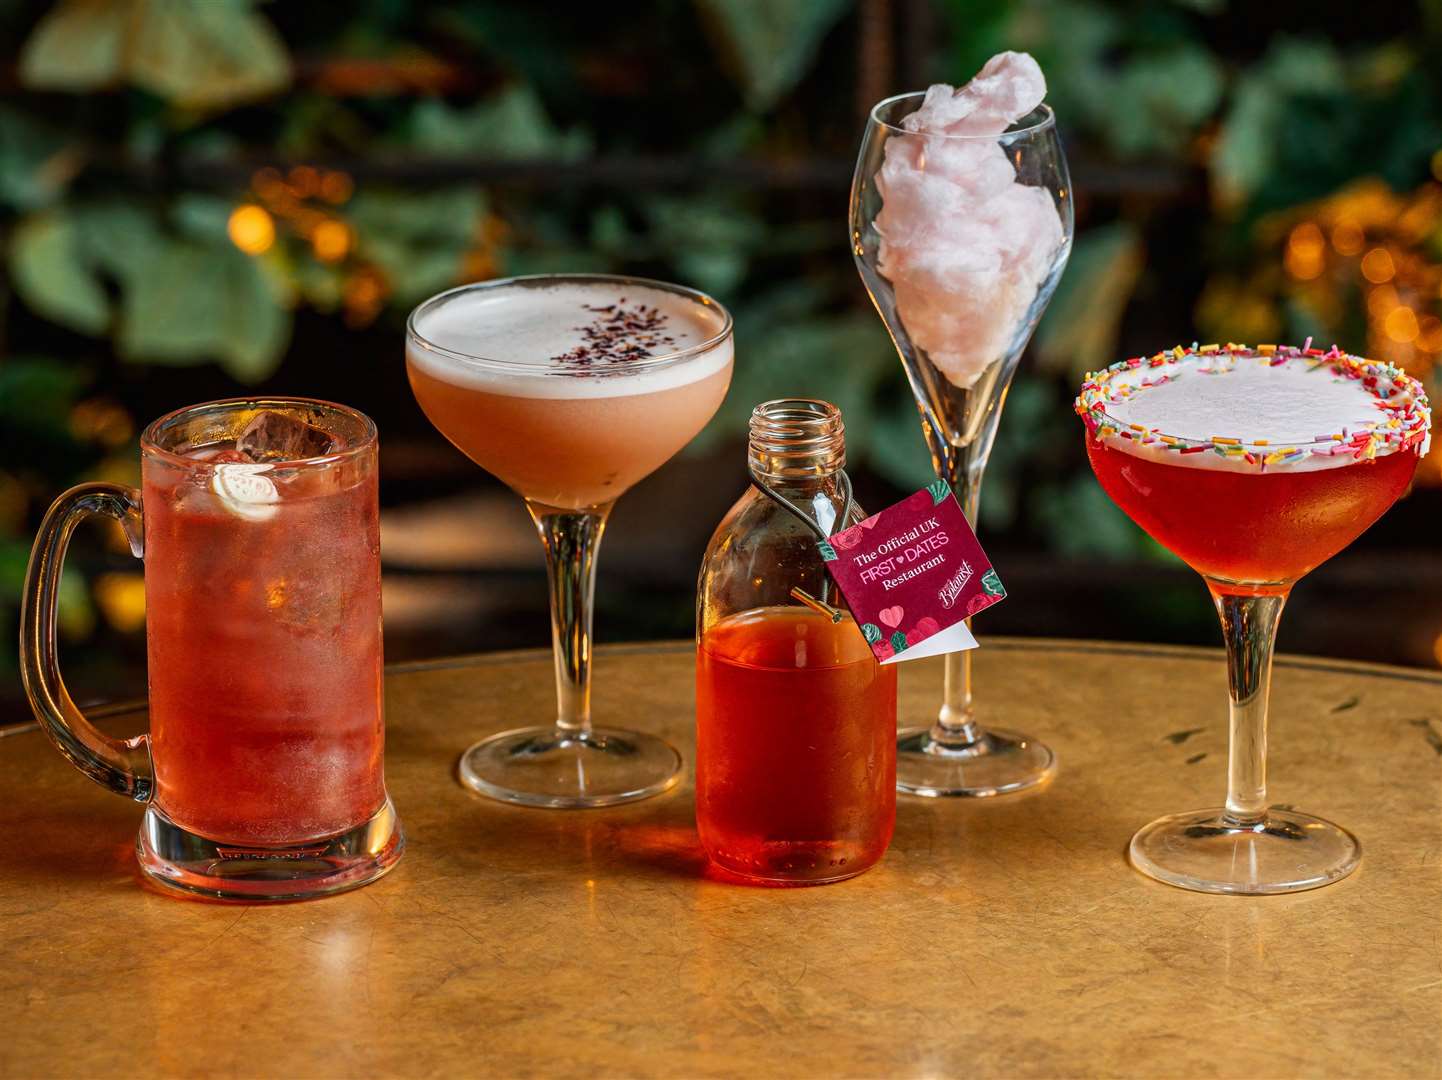 Love-themed cocktails will be on offer until March 12. Picture: The Botanist